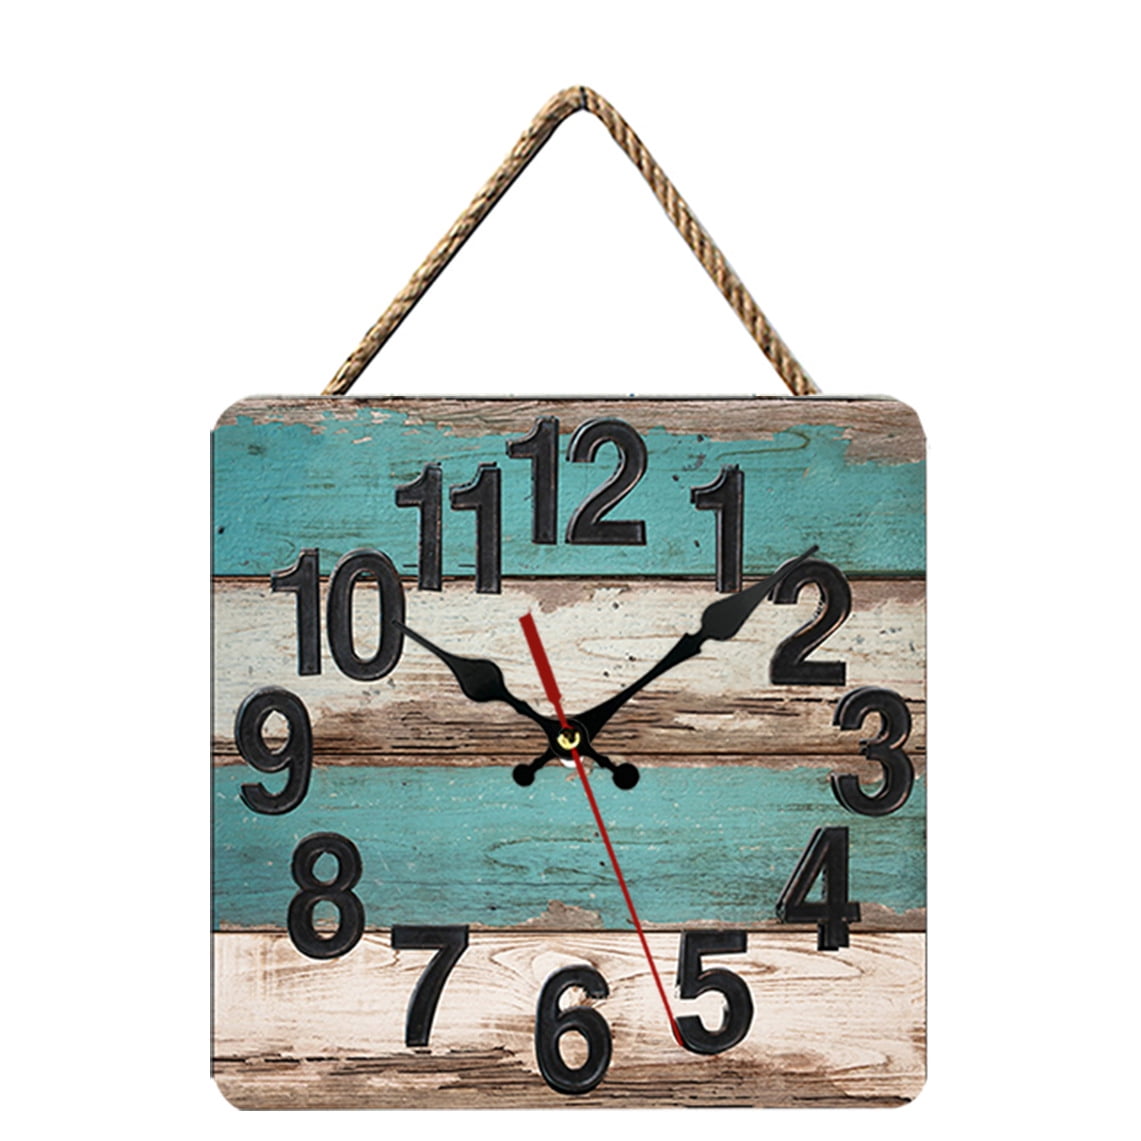 Vintage Wooden Decorative Anchor Decorative Wall Clocks Battery Operated 10 Inch Round Silent Non Ticking for Living Room Bedroom Home Decor